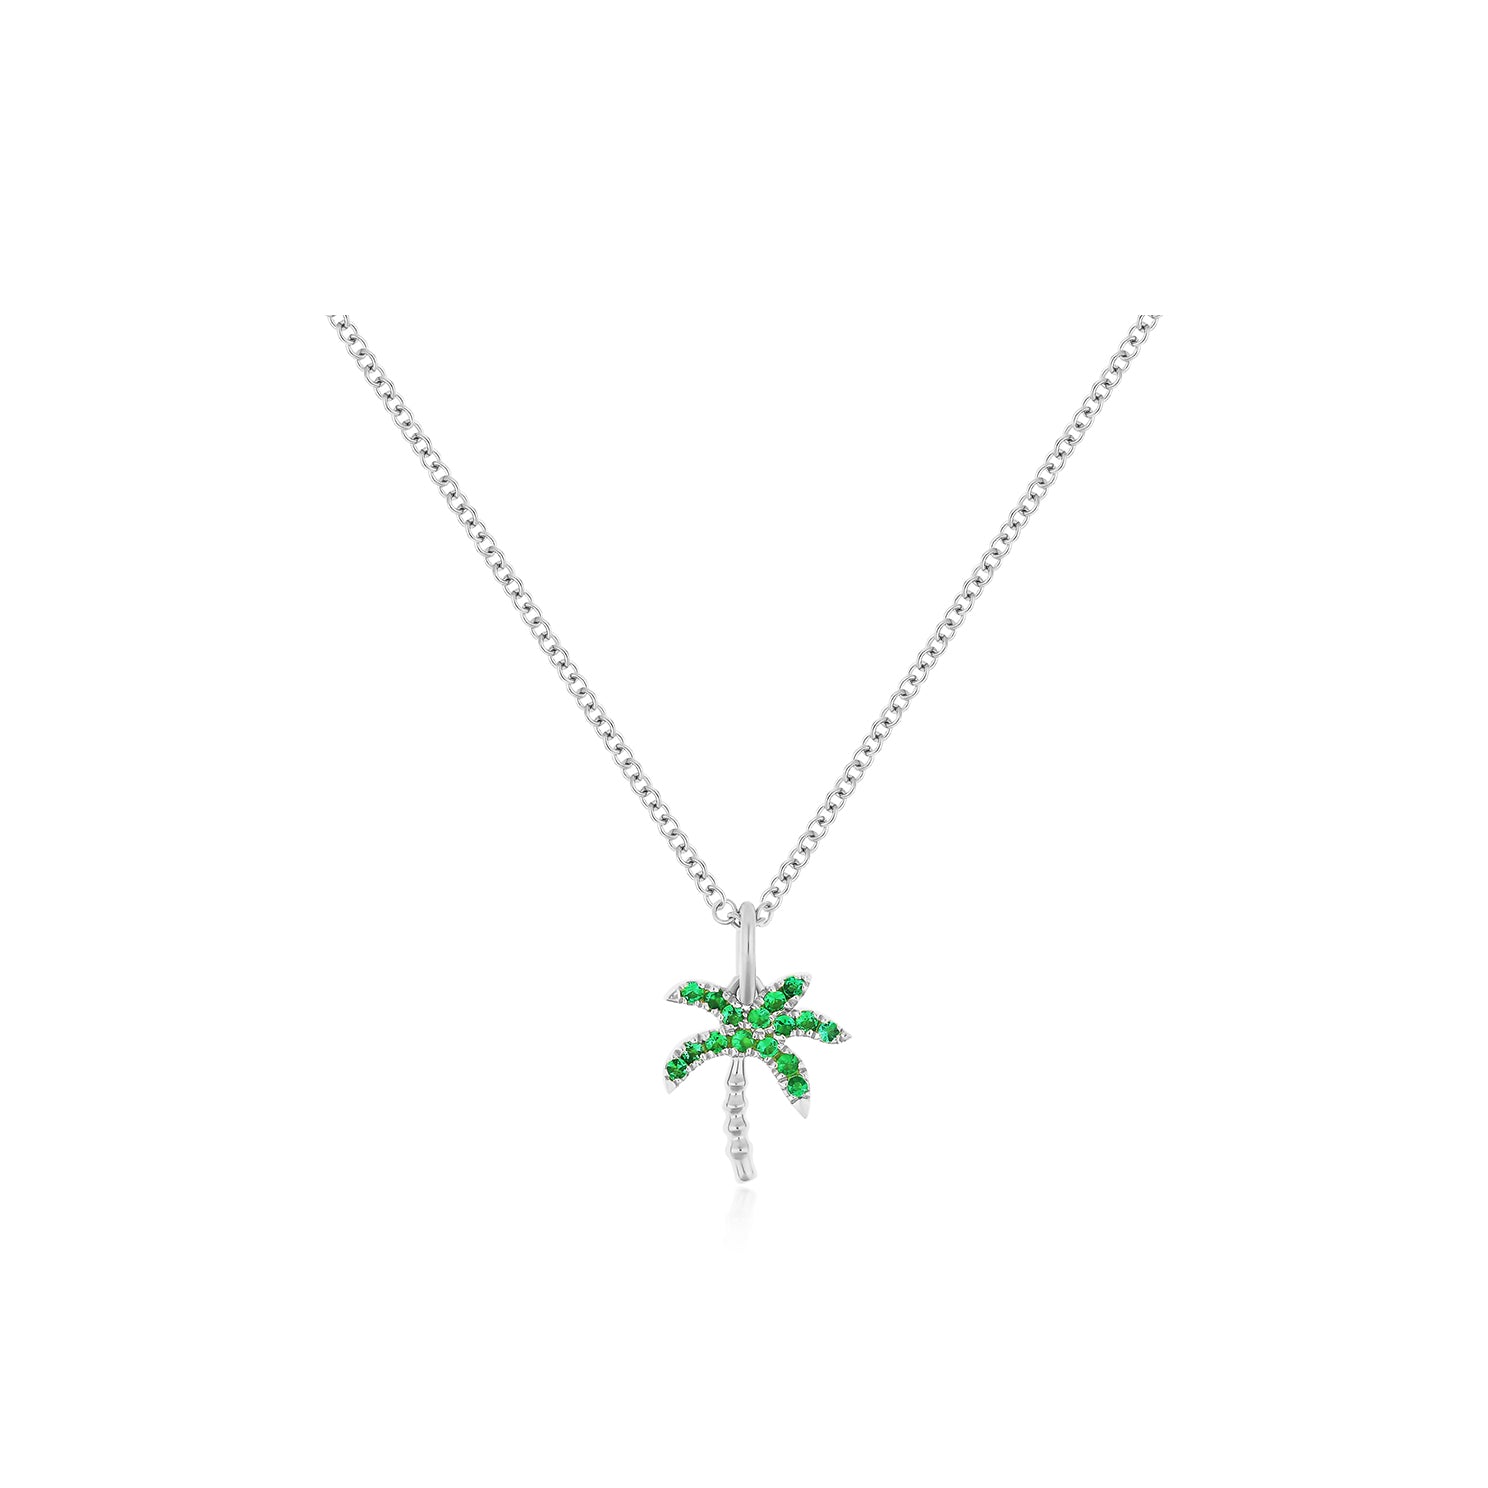 Emerald Wild Palm Necklace in 14k white gold